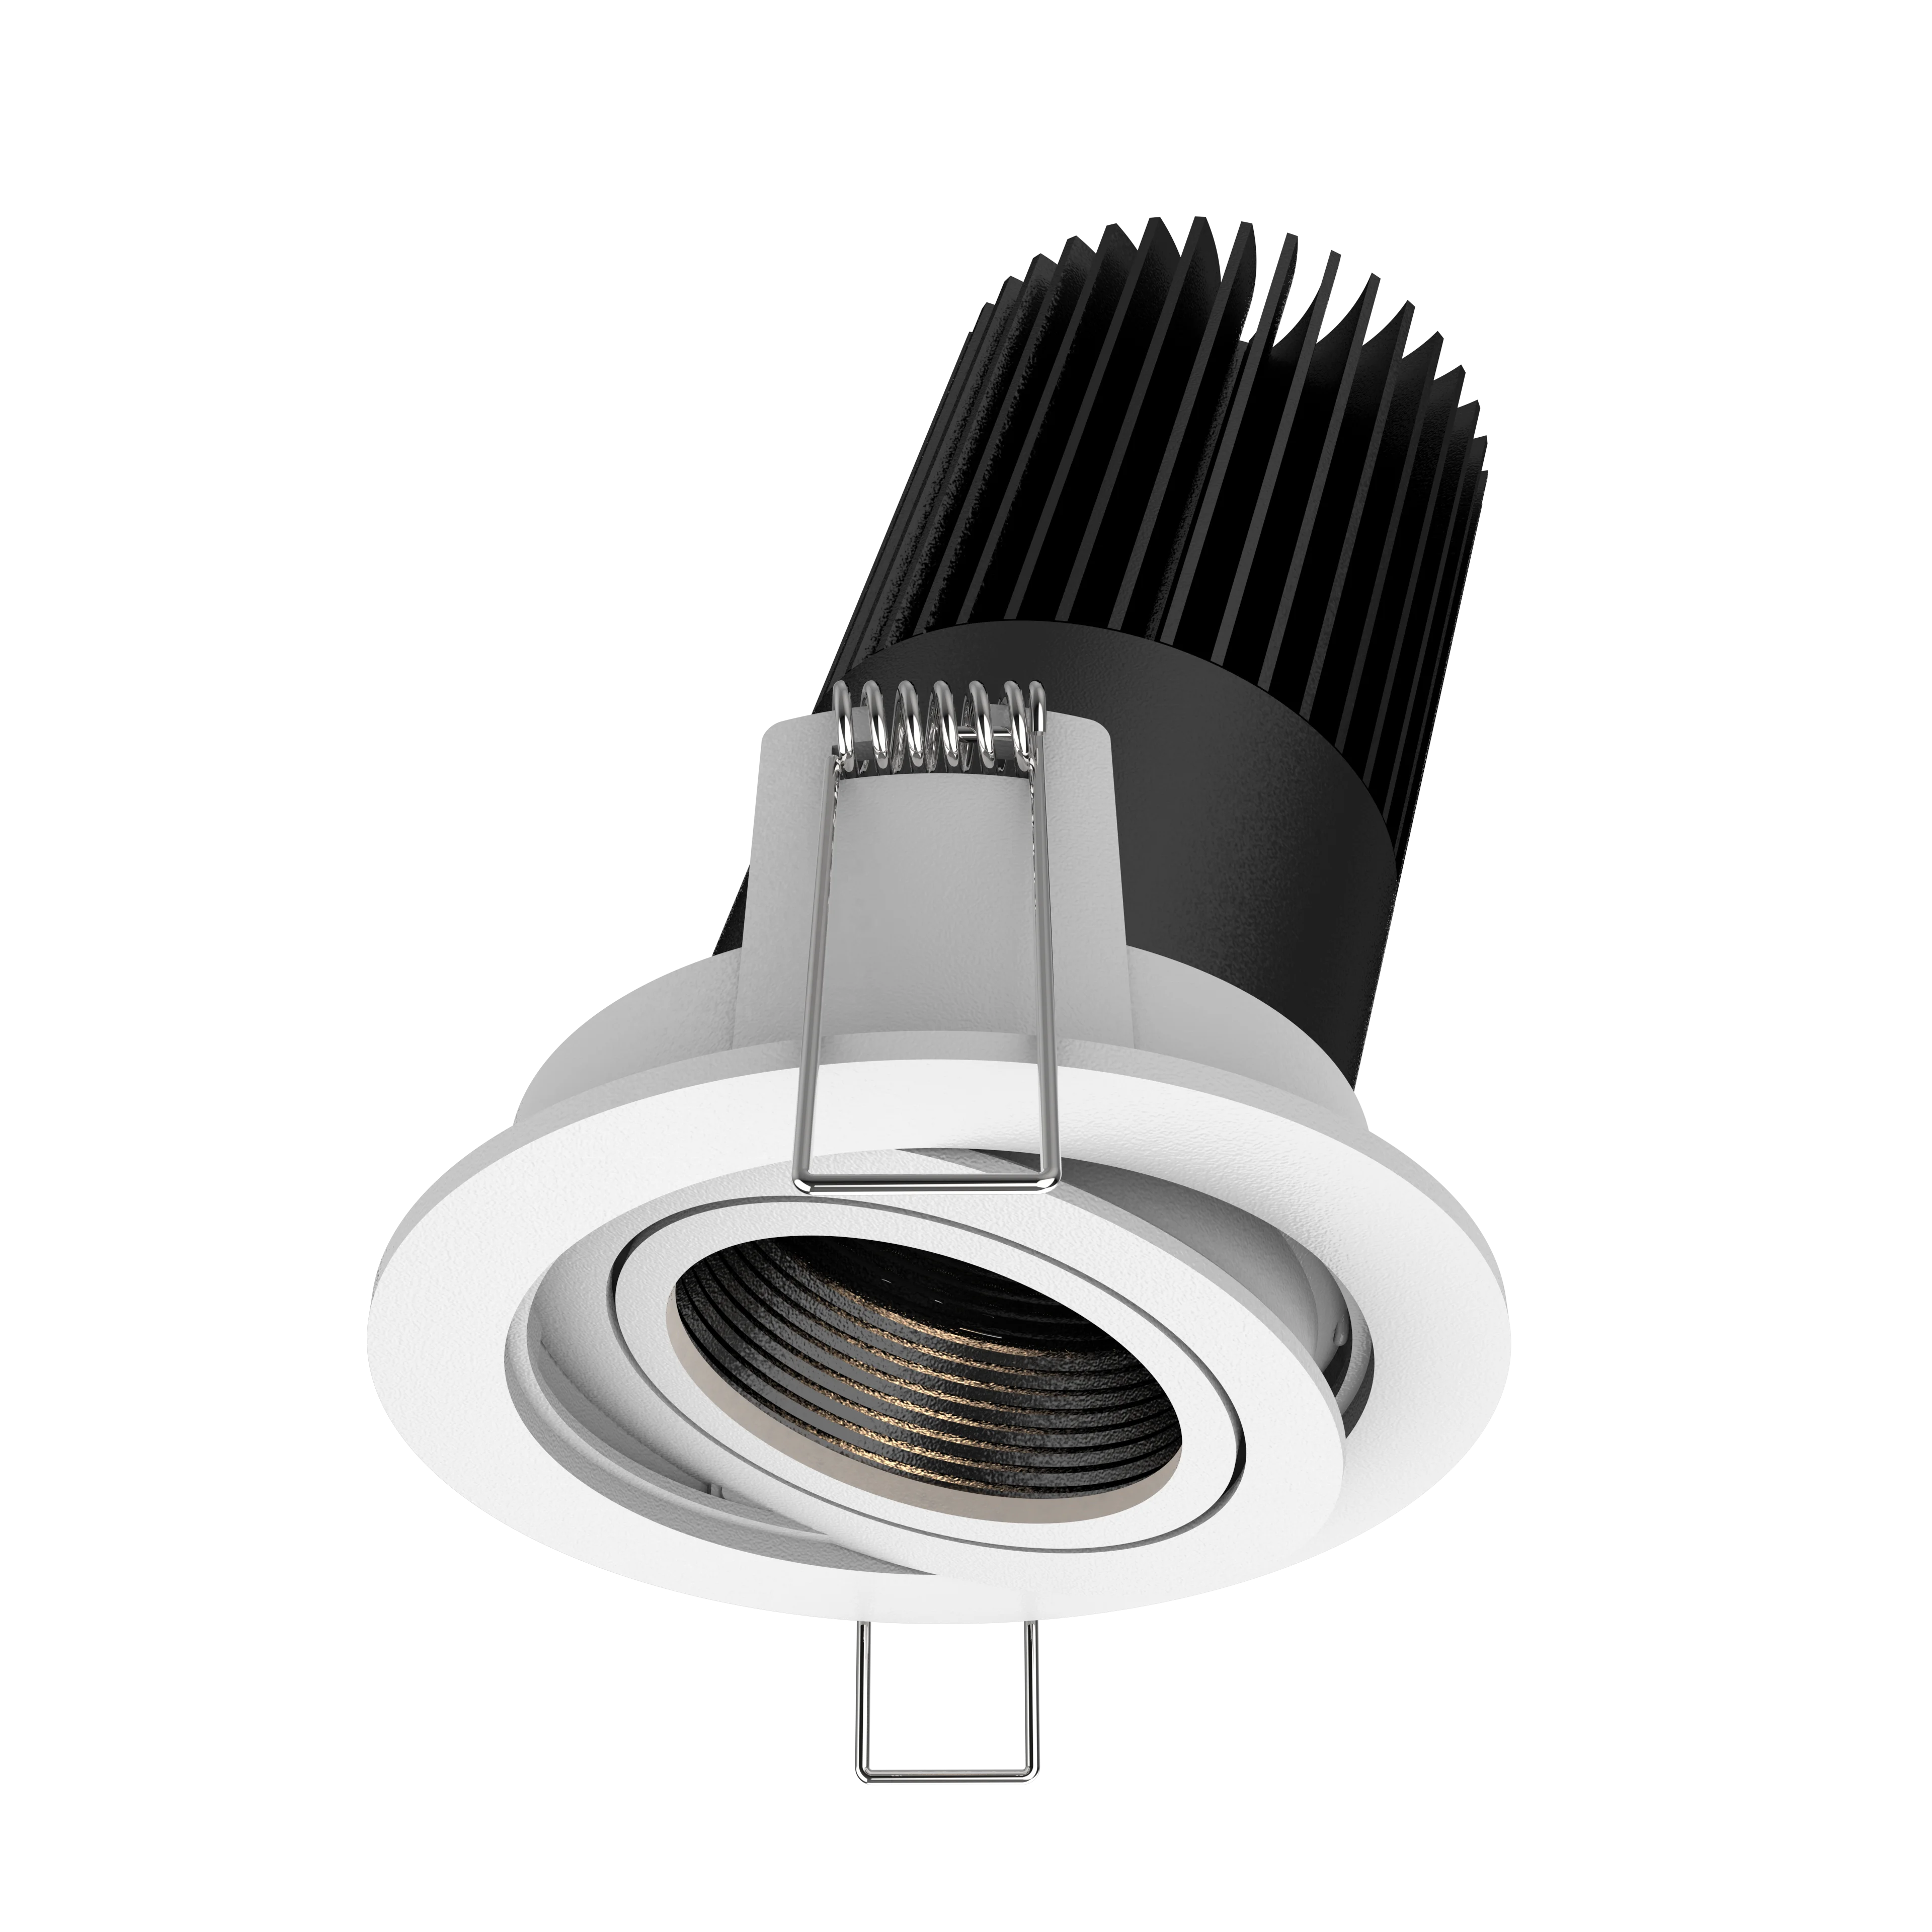 Narrow beam angle LED recessed down light 7w 12w 15w dimmable cob ceiling lamp spotlights